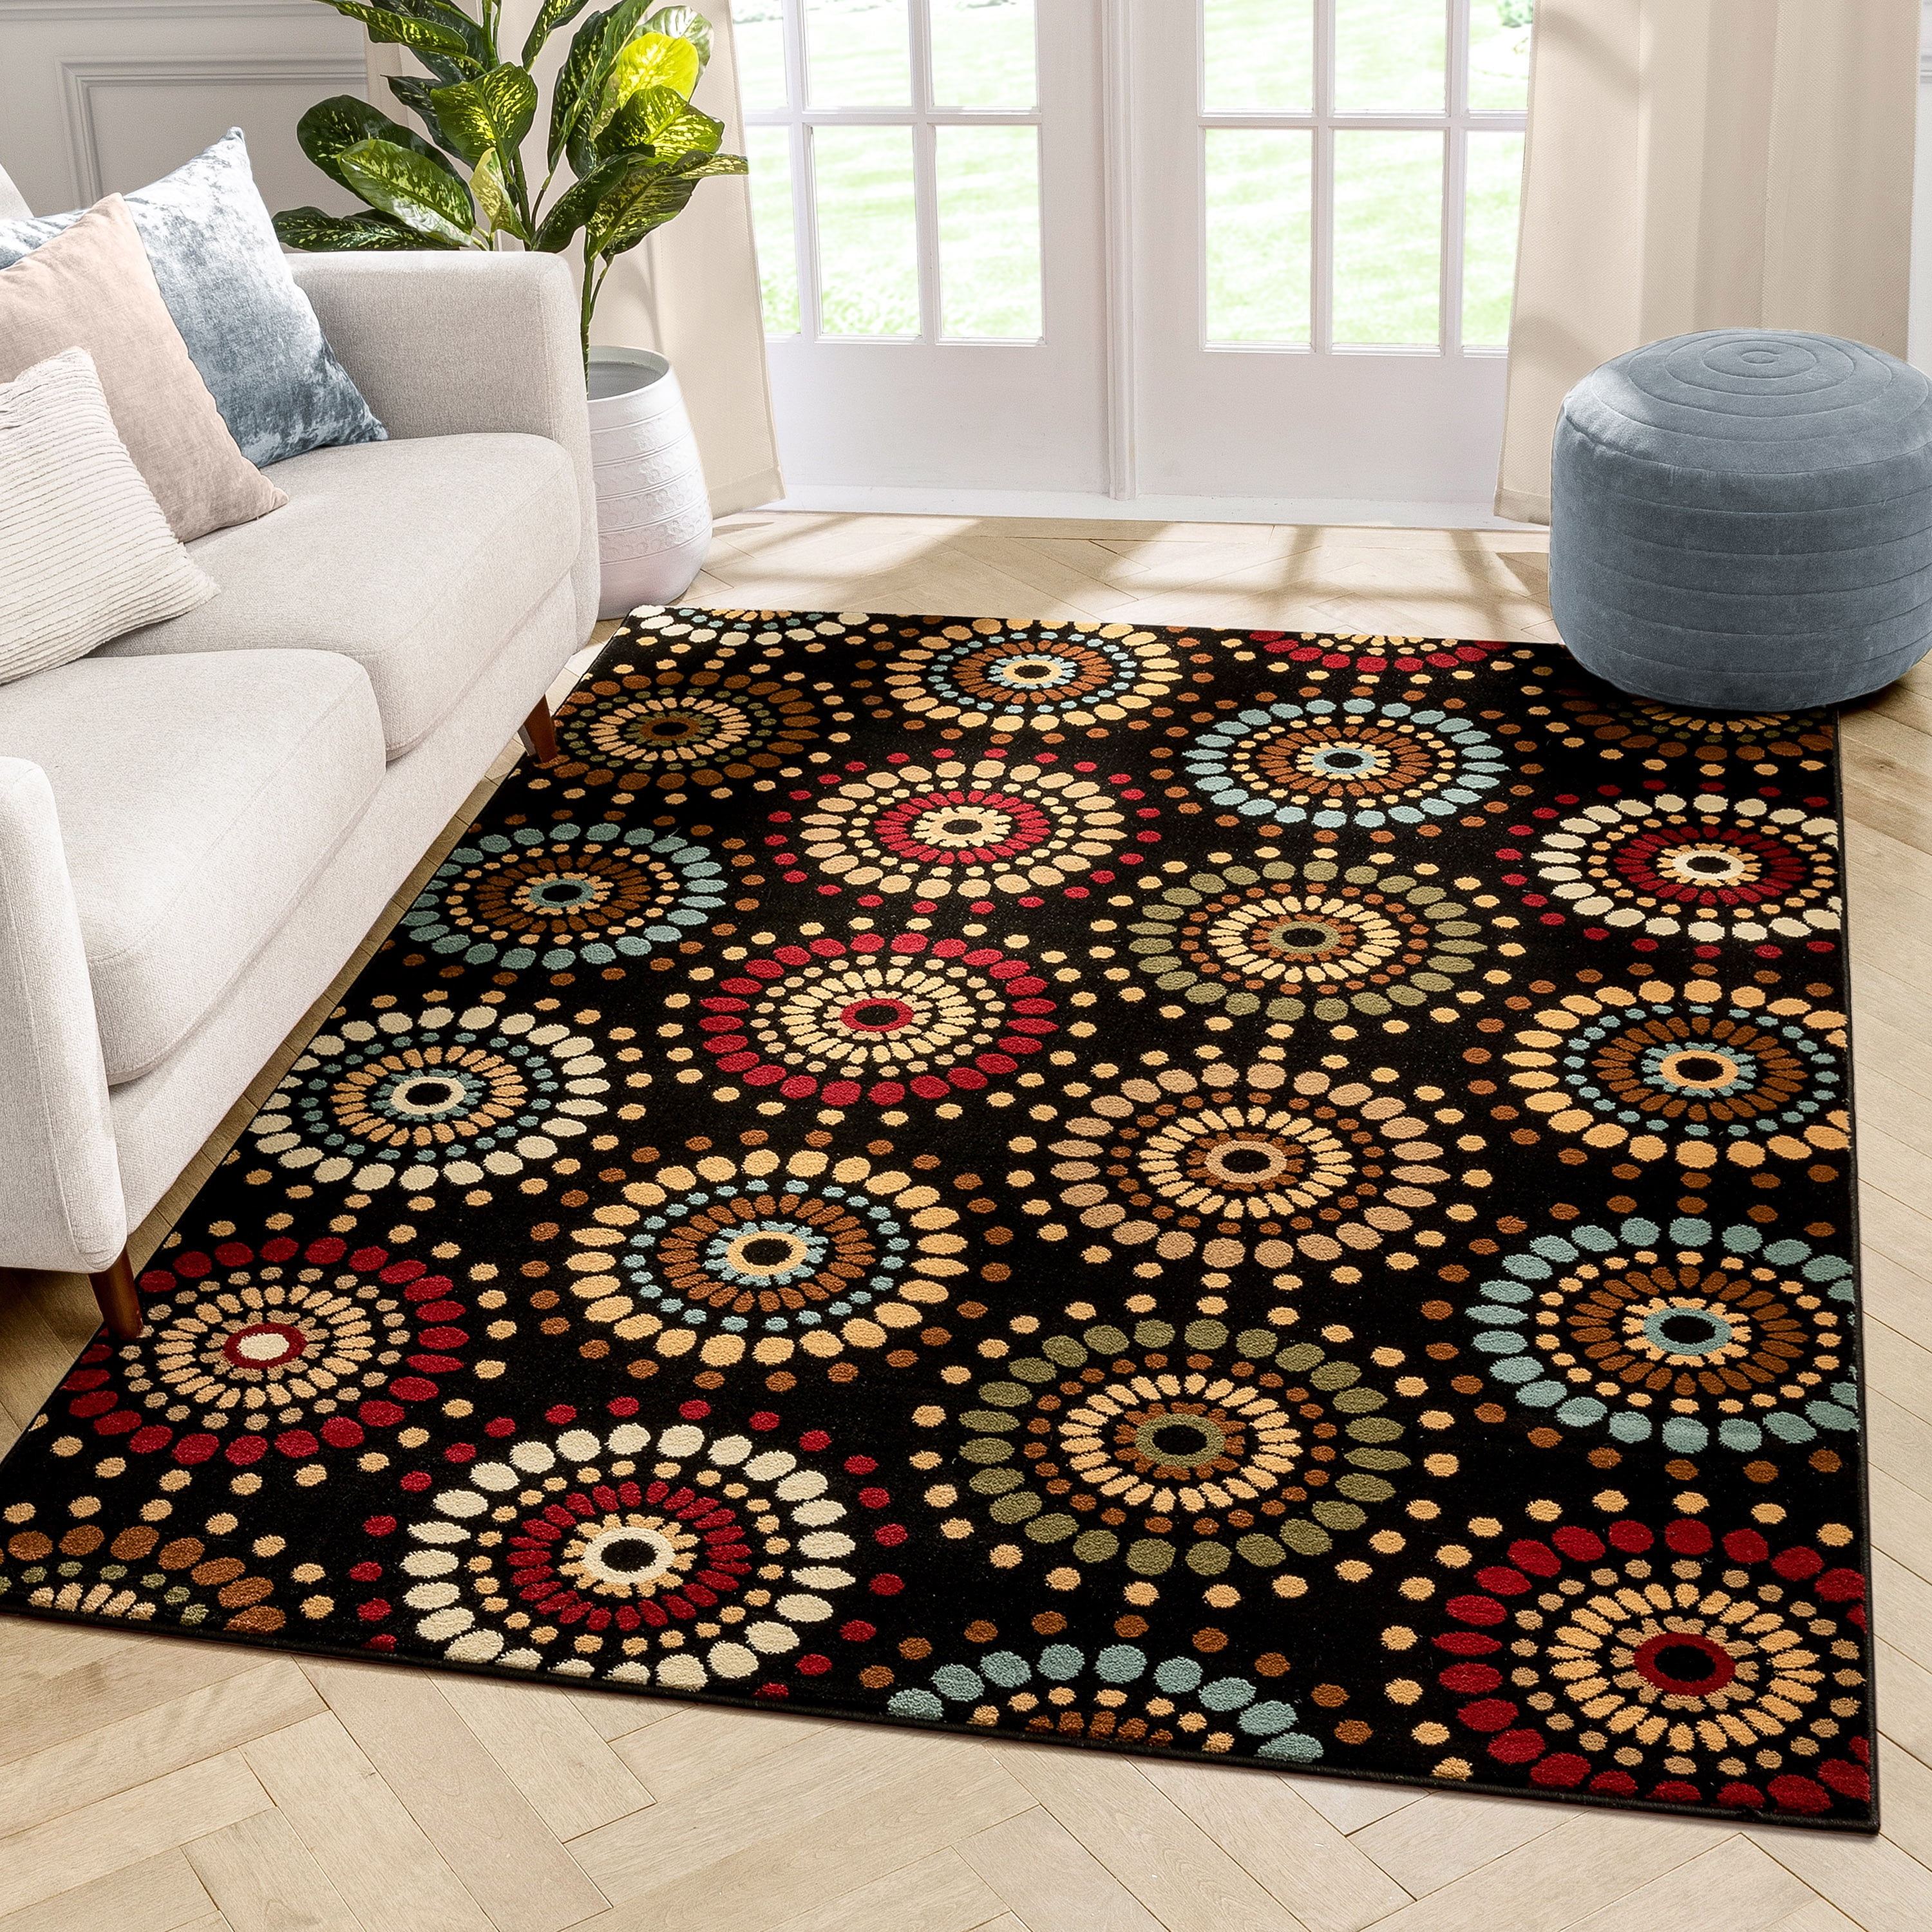 Noble Palace Red French European Formal Traditional Area Rug 5x7 Easy to Clean Stain Fade Resistant Shed Free Modern Contemporary Floral Transitional Soft Living Dining Room Rug 5'3 x 7'3 